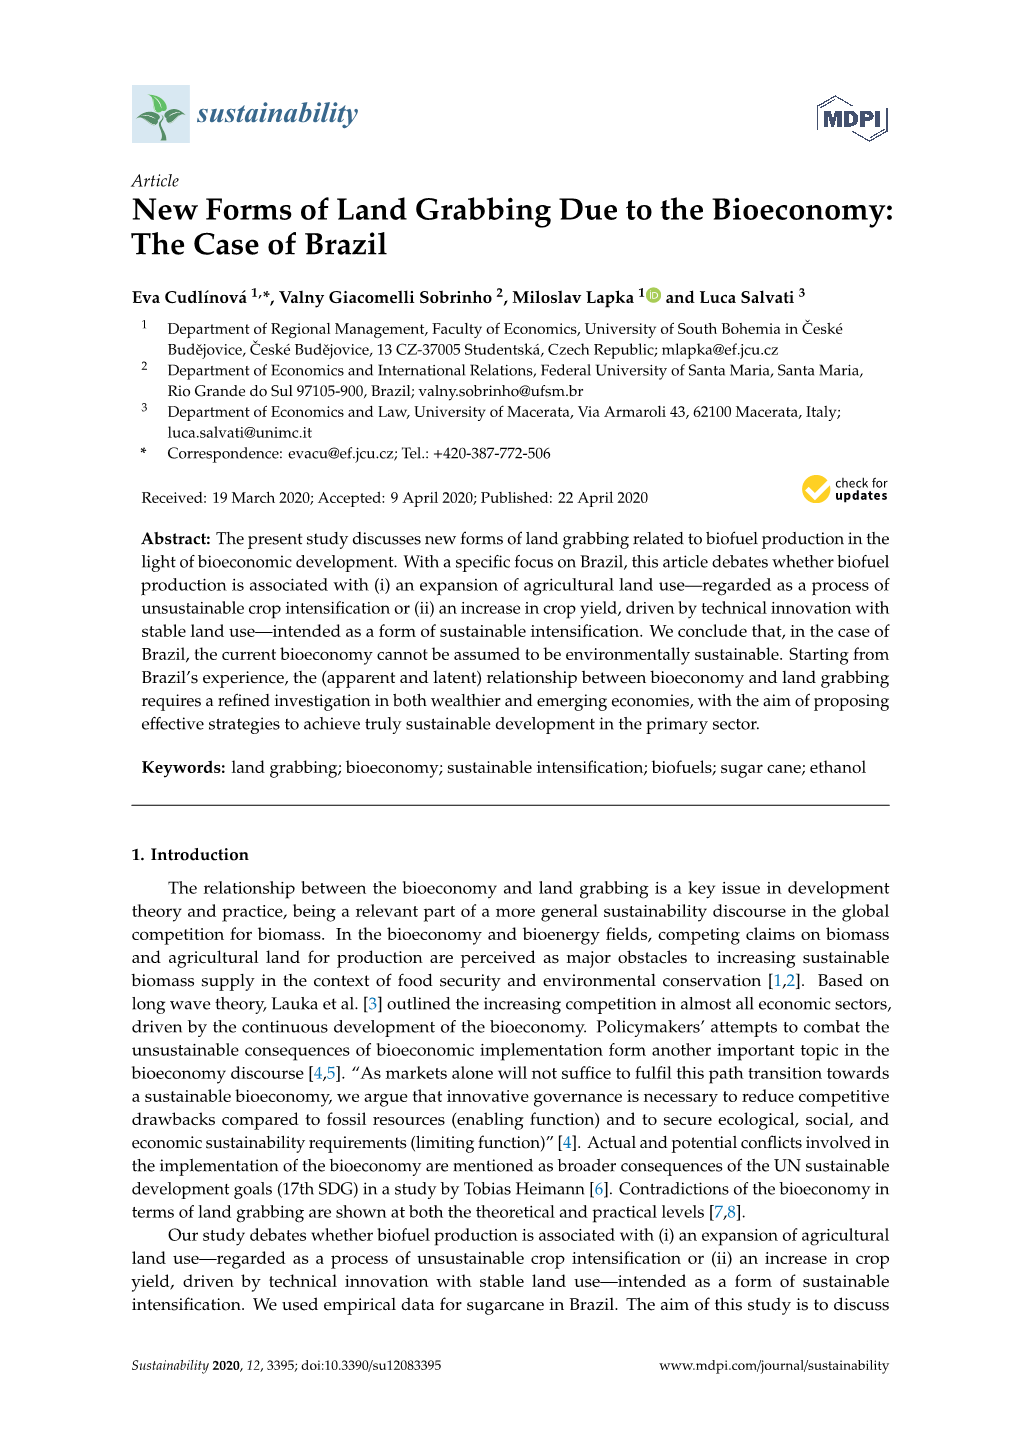 New Forms of Land Grabbing Due to the Bioeconomy: the Case of Brazil